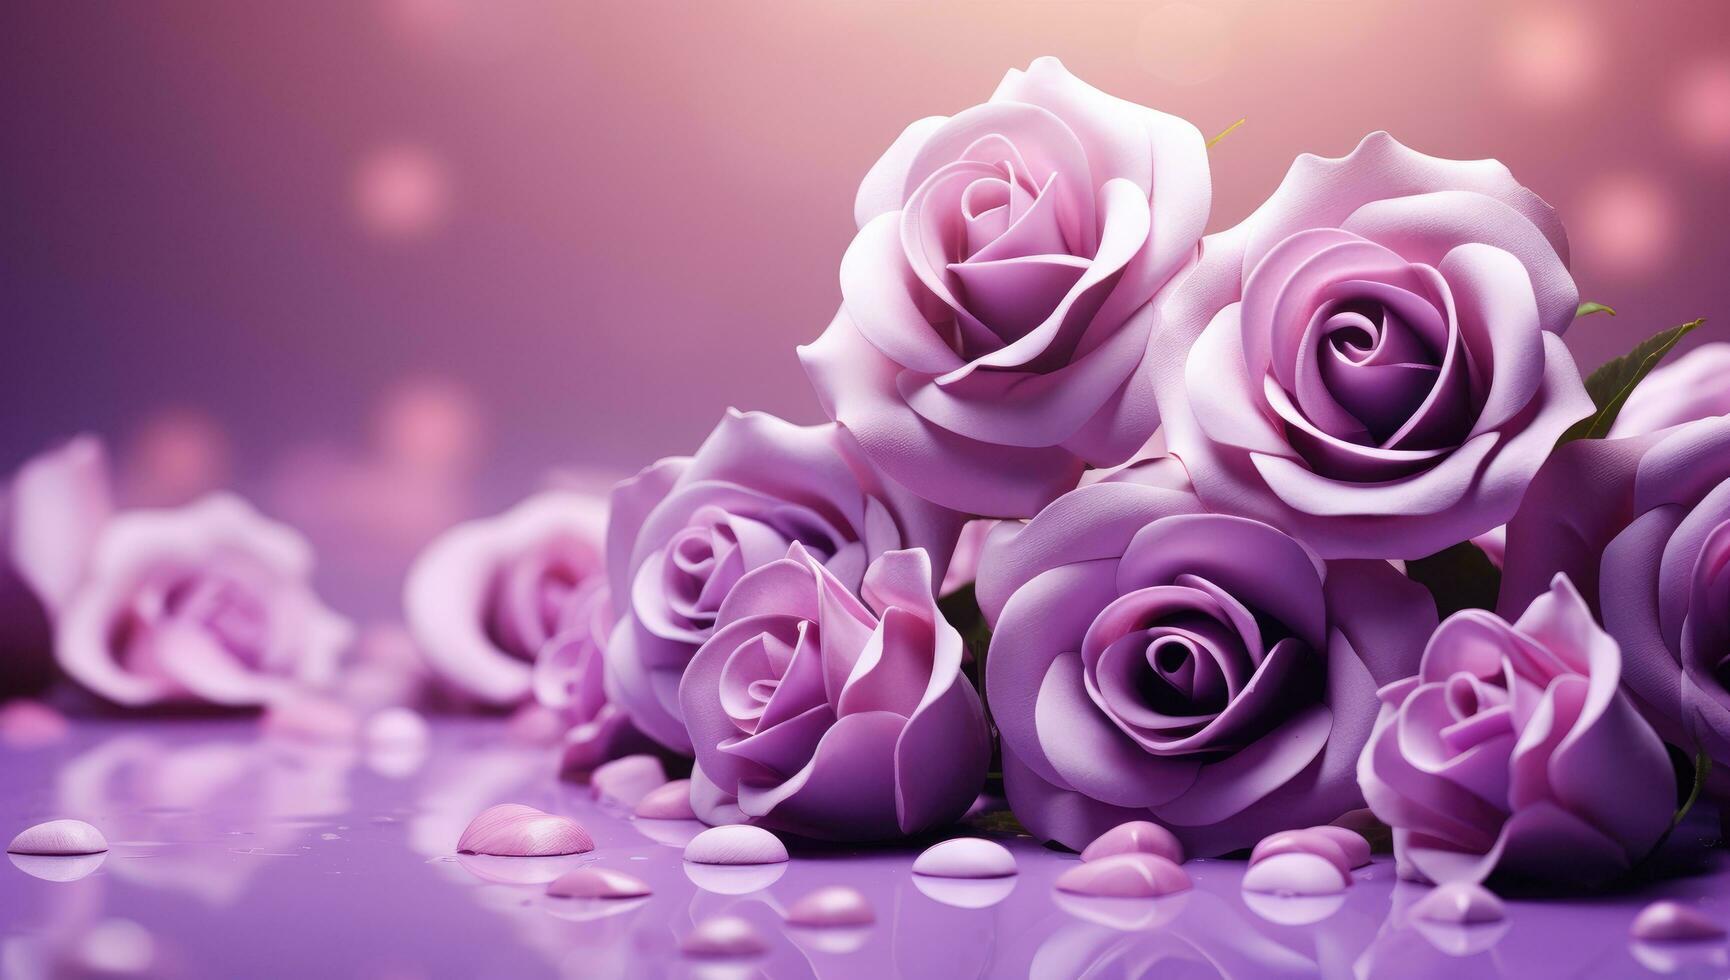 AI generated purple roses and hearts on a violet background photo